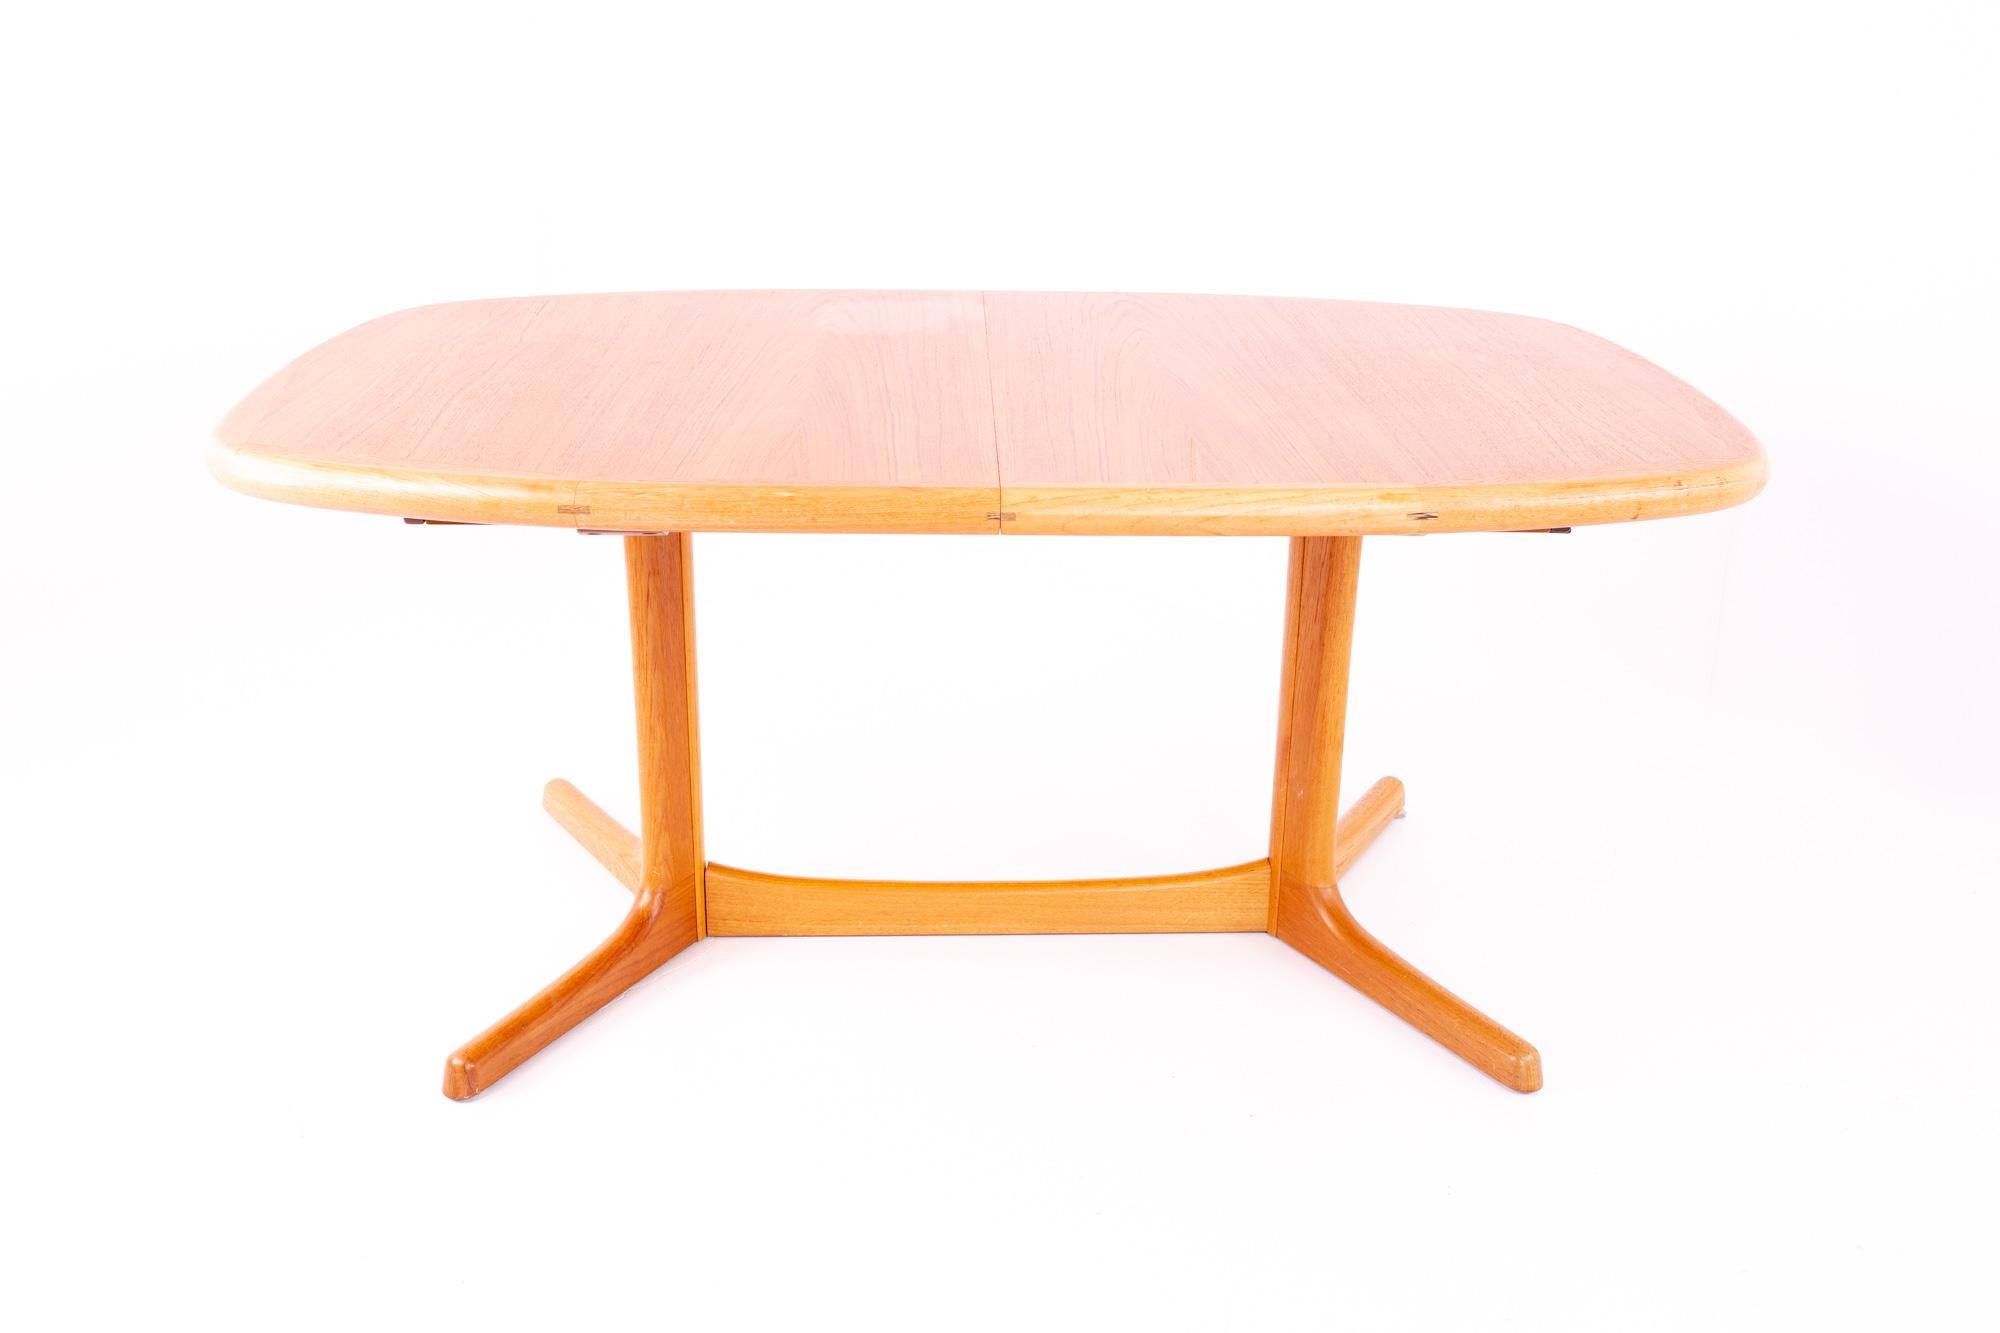 Dyrlund teak Mid Century 10 person dining table

Table measures: 64 wide x 42 deep x 28.5 high

This price includes getting this piece in what we call restored vintage condition. Upon purchase it is fixed so it’s free of watermarks, chips, or deep